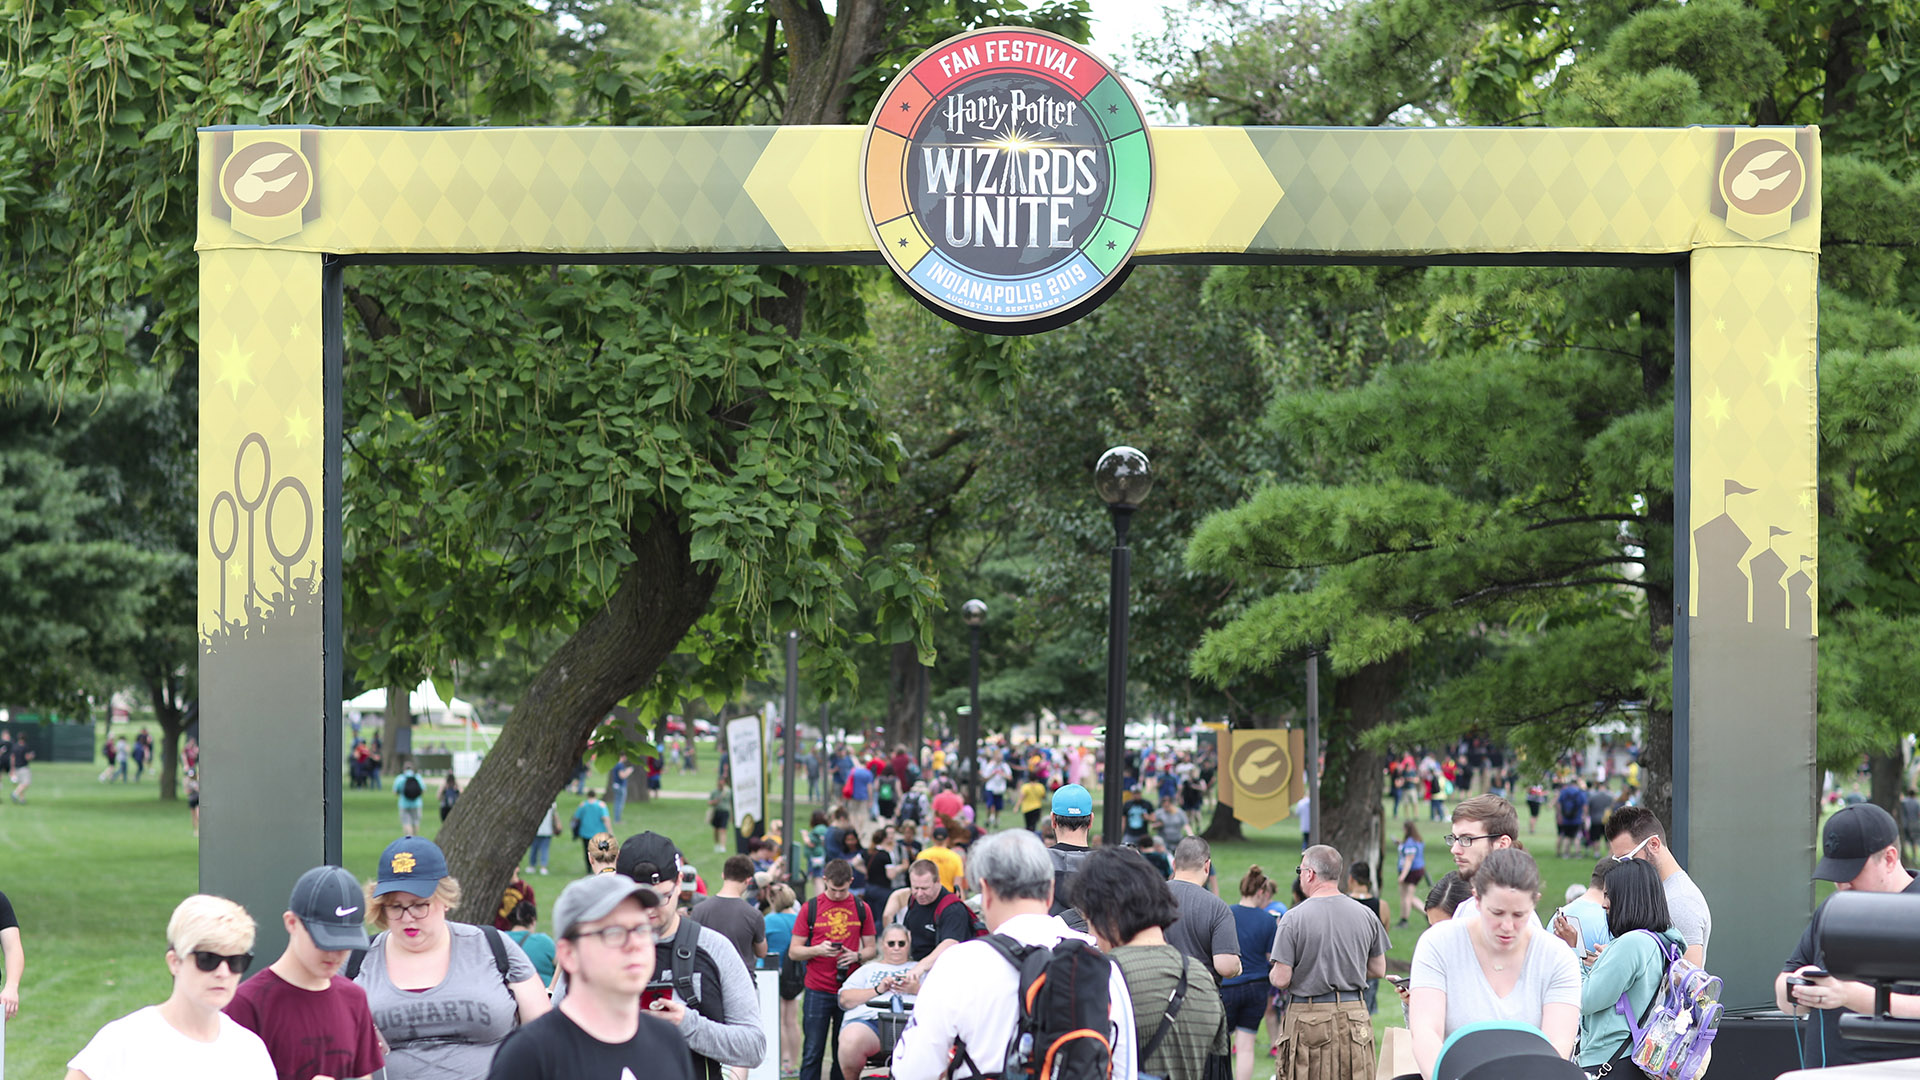 Attendees of the “Harry Potter: Wizards Unite” Fan Festival make their way beneath an archway at White River State Park.